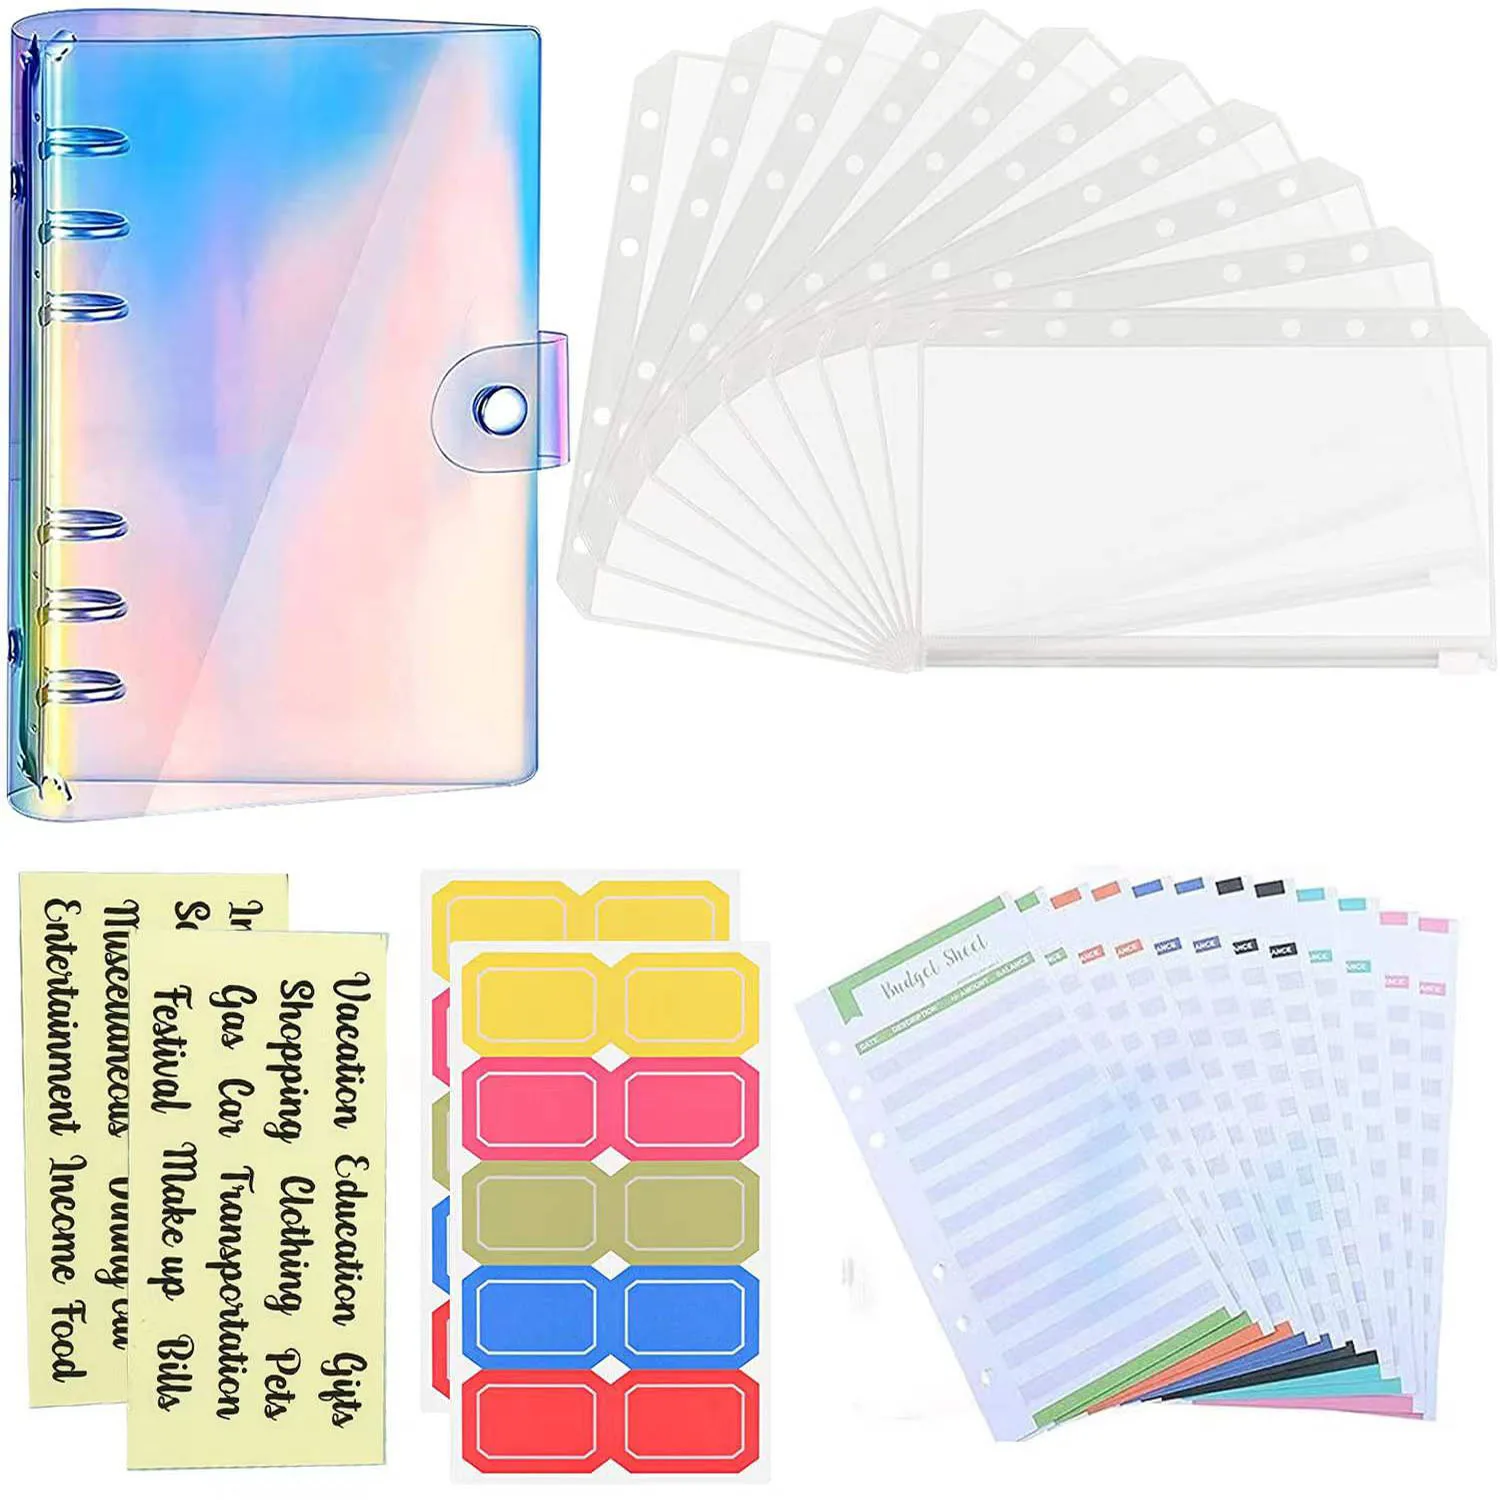 A6 Budget Binder Waterproof Cash Envelopes Notebook Organizer System with 10 Zipper Pockets,12 Budget Sheet and Label Stickers a6 pu leather binder budget cash envelopes system planner organizer with 12pcs binder clear zipper pockets and label stickers